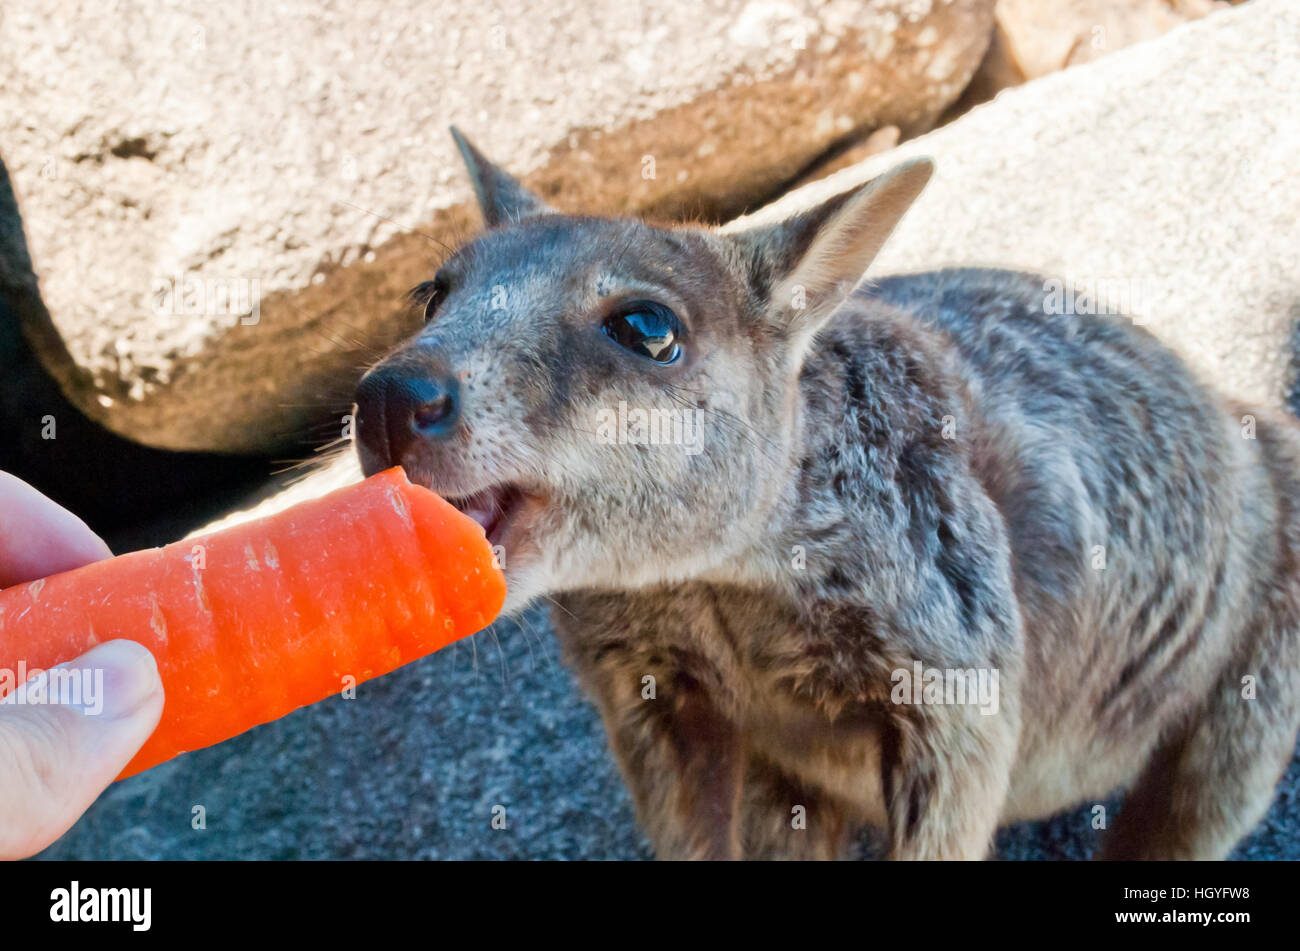 Rock wallaby eating a carrot, Magnetic Island, Australia Stock Photo